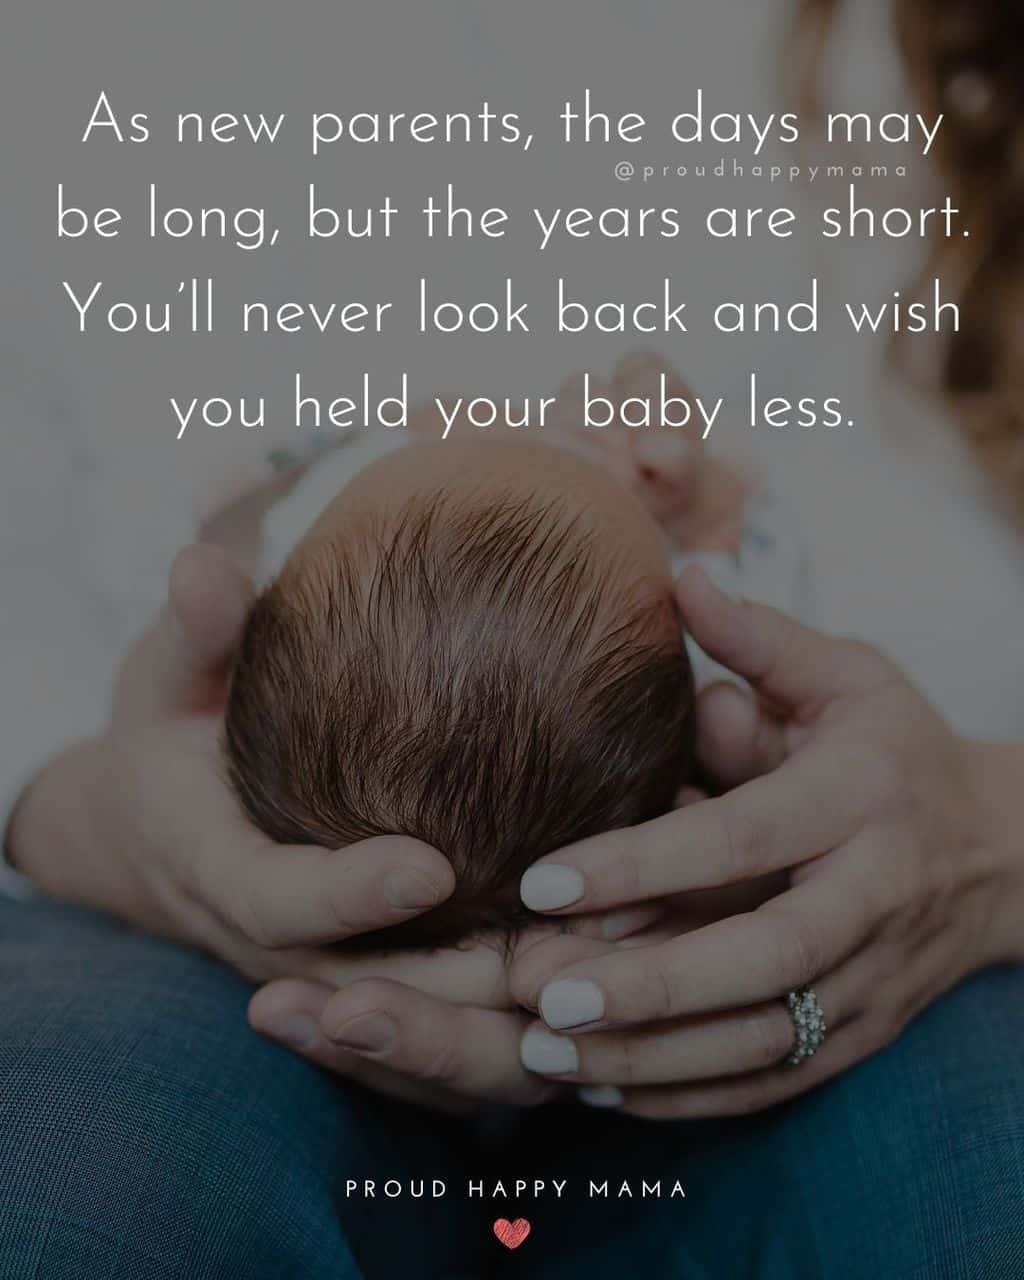 50 Inspirational Quotes For New Parents (With Images)